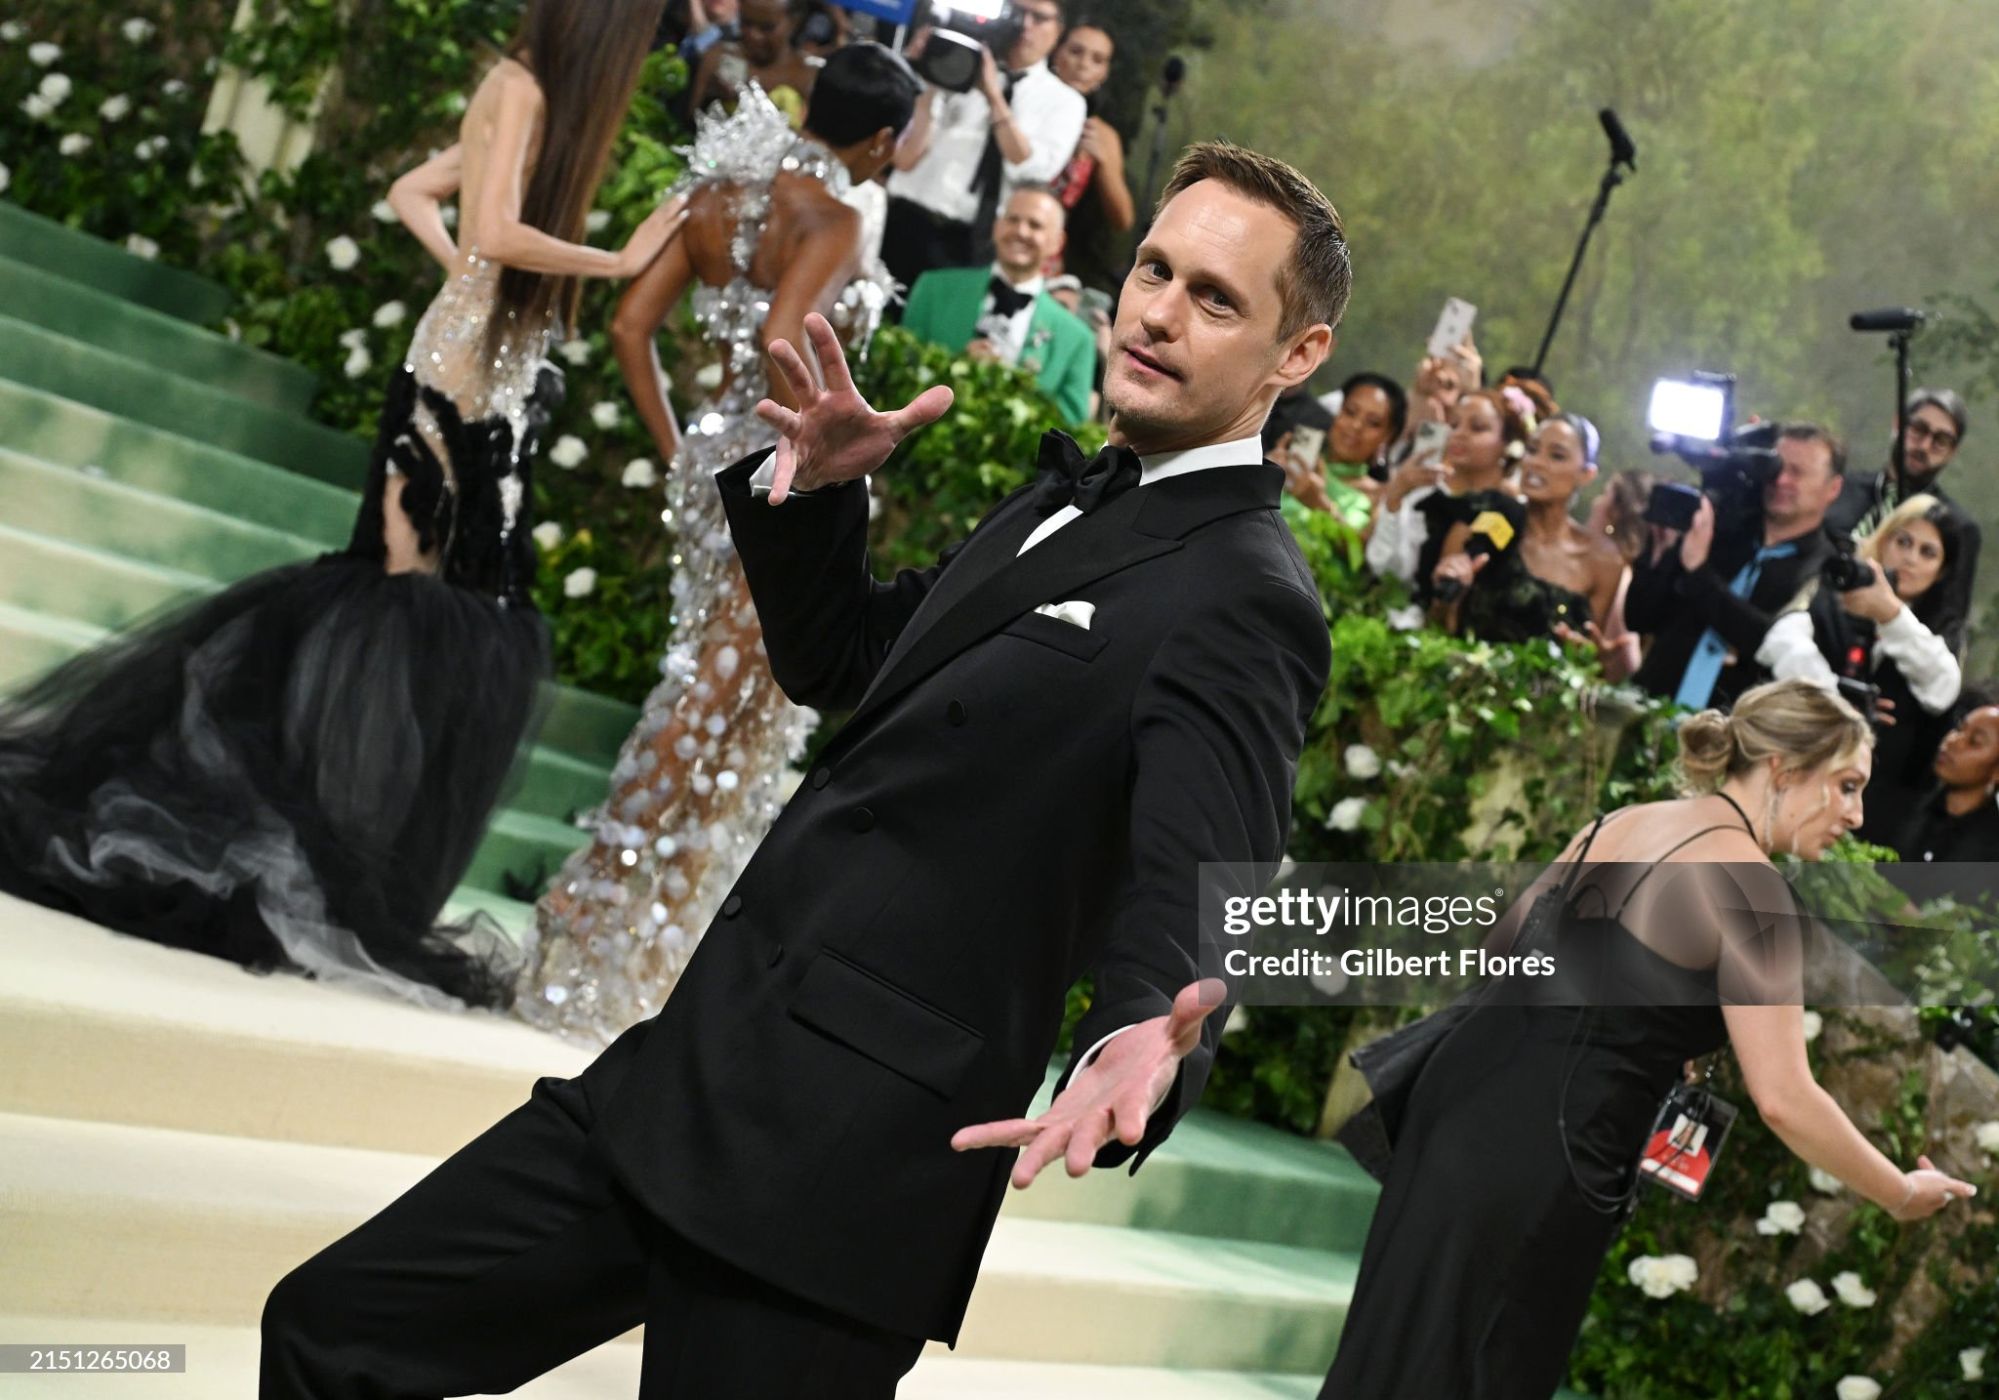 gettyimages-2151265068-2048x2048.jpg